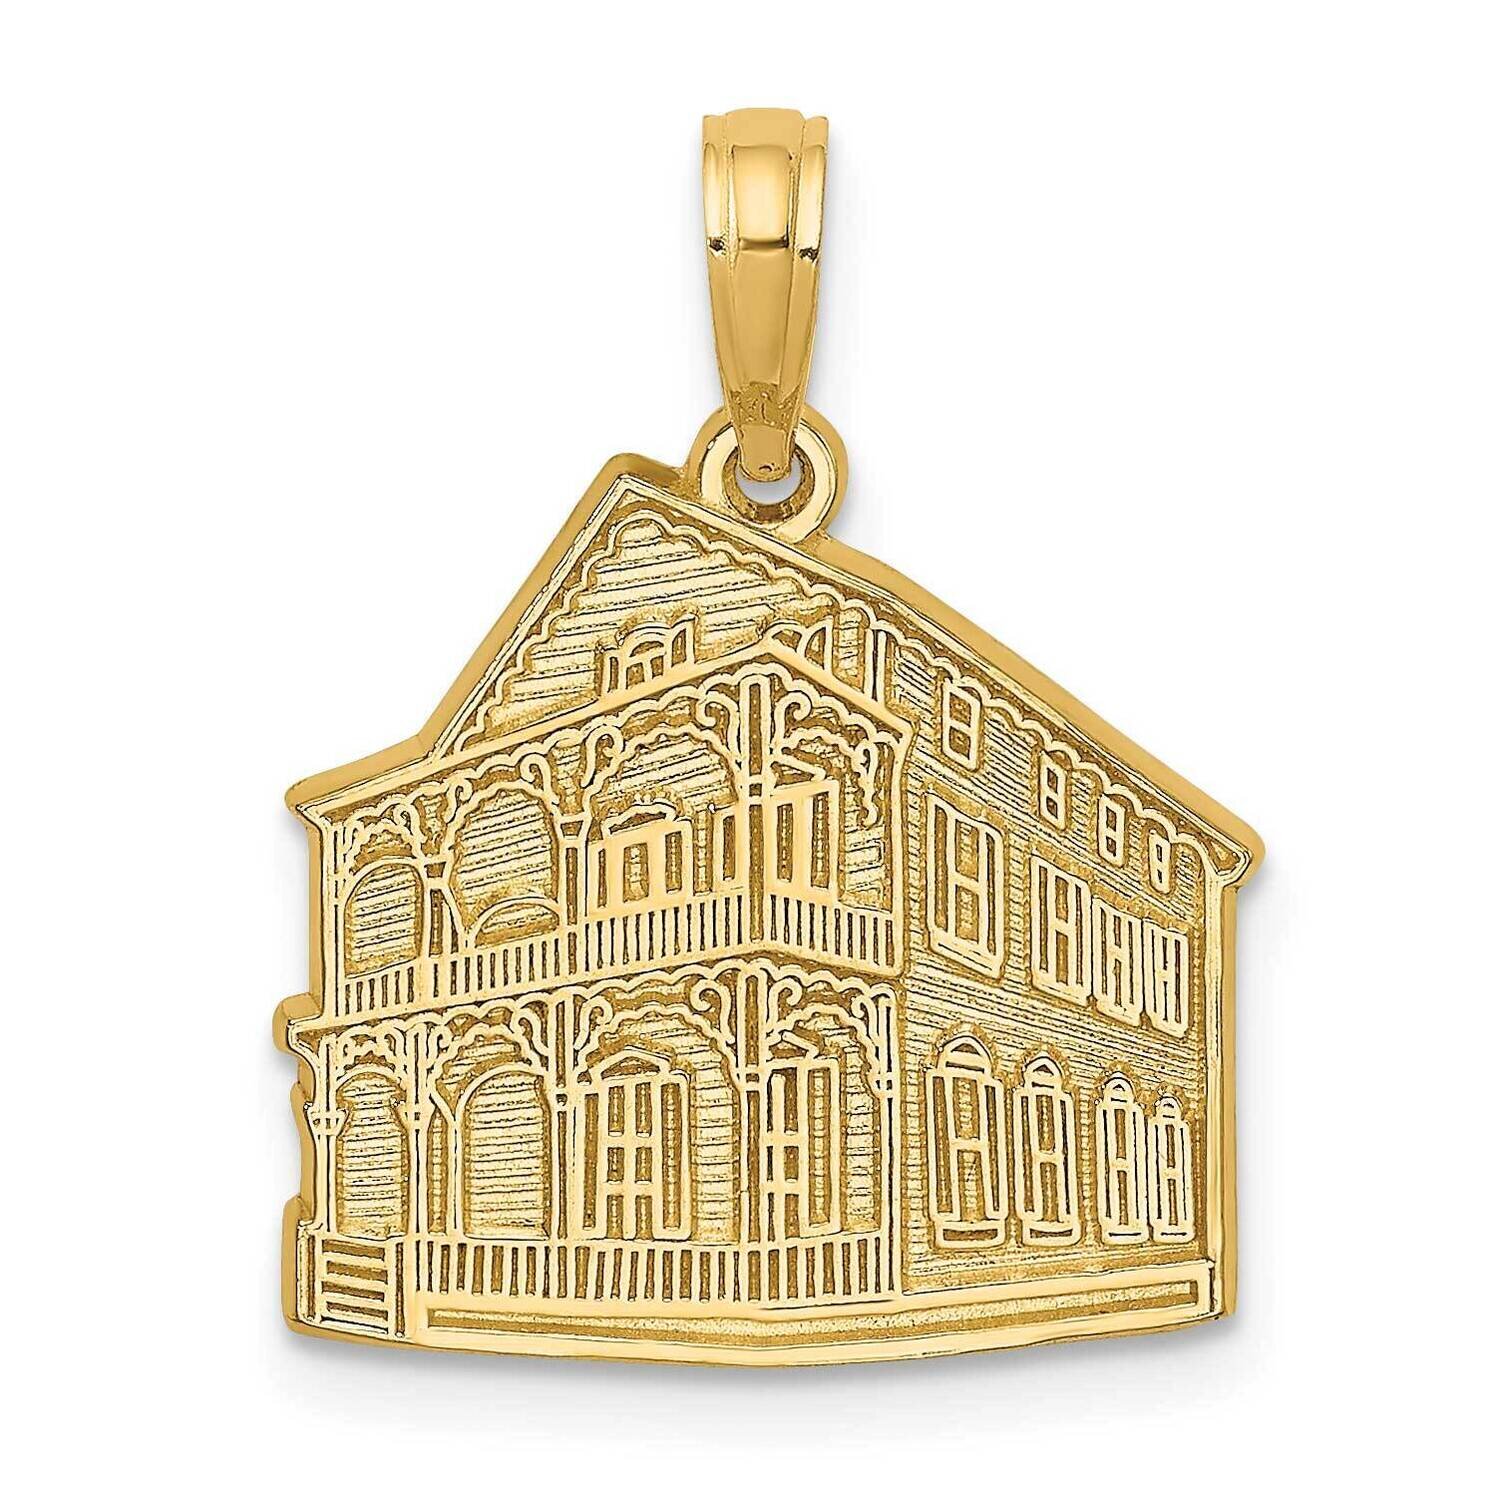 The Pink House - Cape May Nj Charm 14k Gold K8690